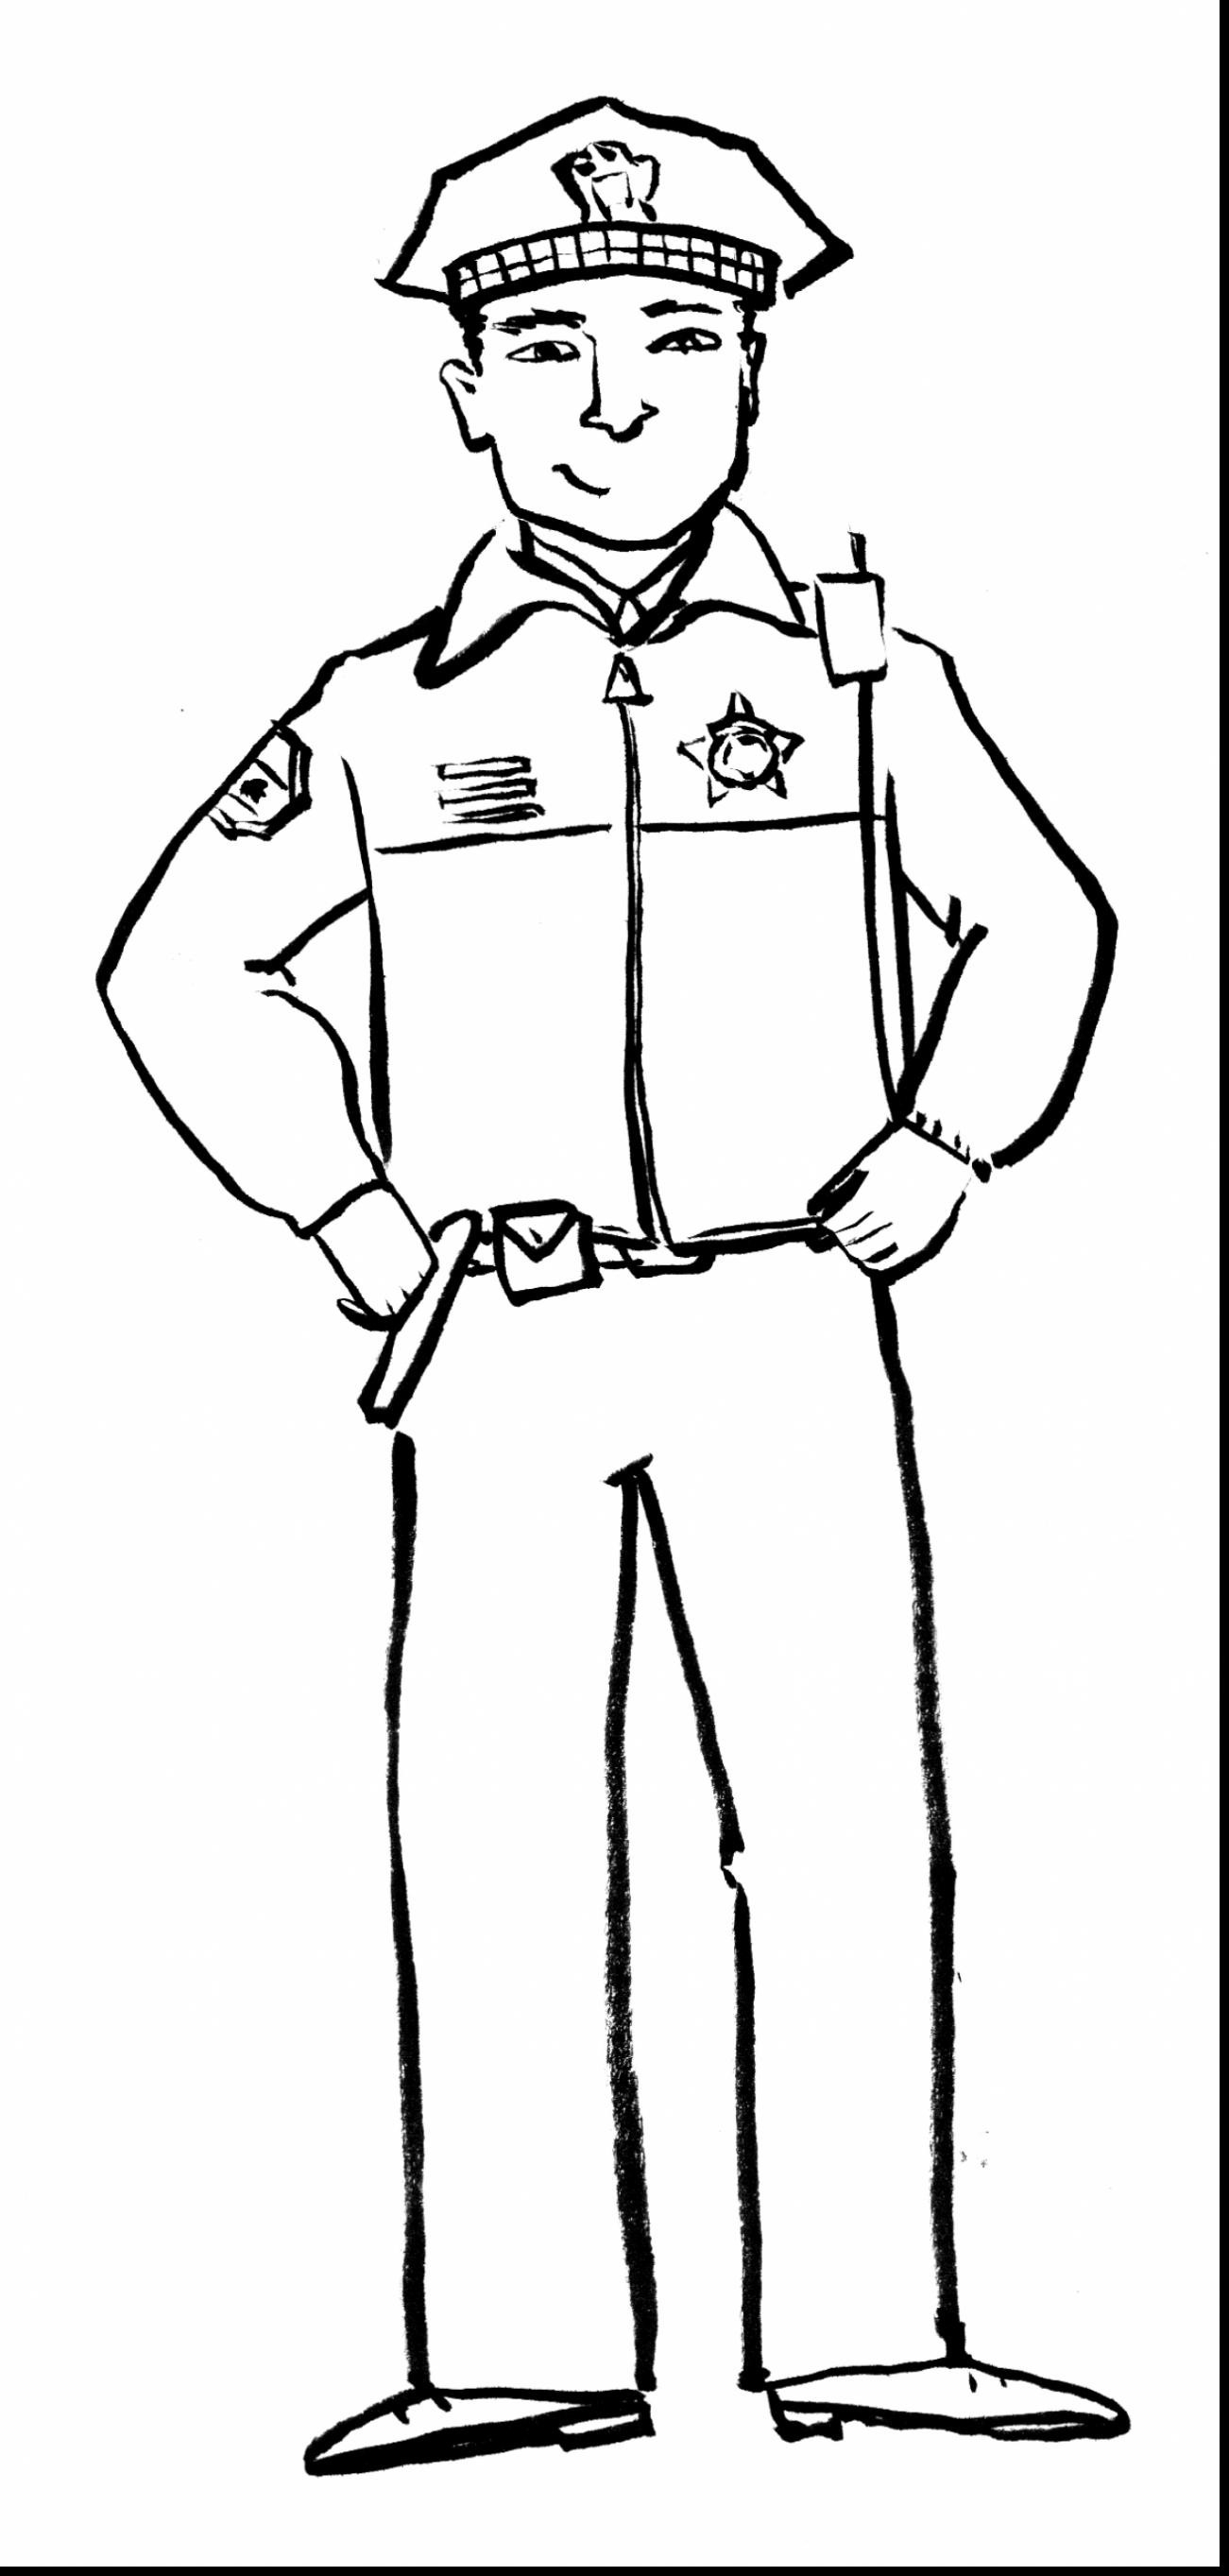 police clipart black and white